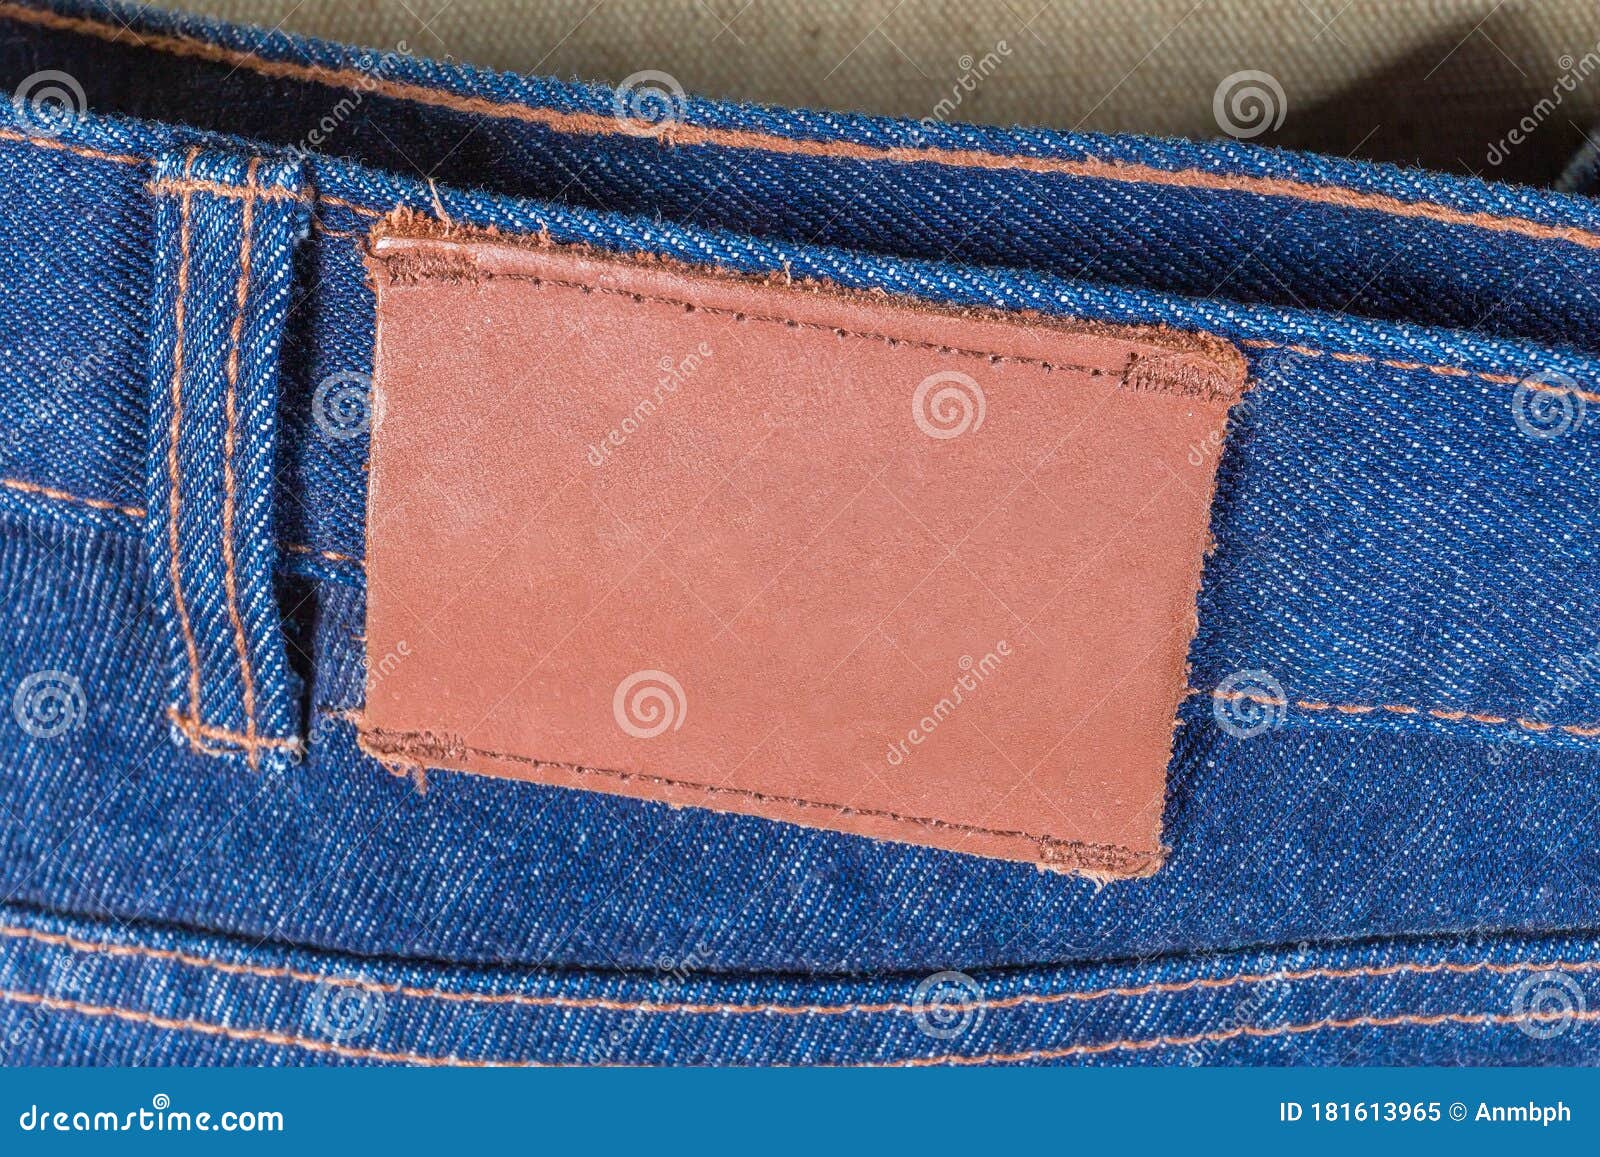 Blank Leather Label Sewed on Waistband of the Blue Jeans Stock Image ...